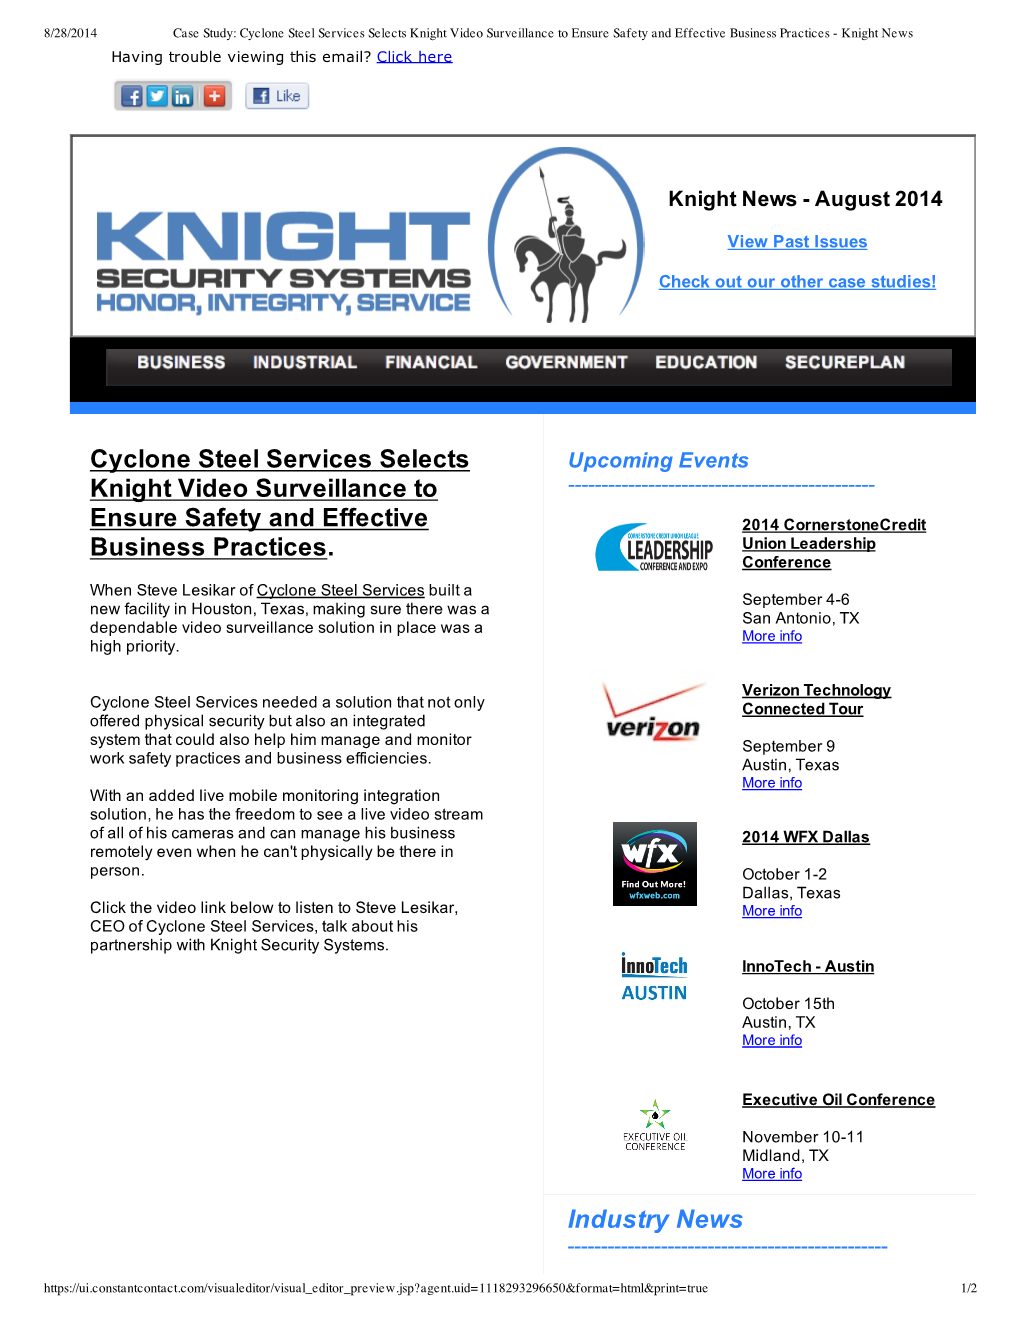 Cyclone Steel Services Selects Knight Video Surveillance to Ensure Safety and Effective Business Practices - Knight News Having Trouble Viewing This Email? Click Here